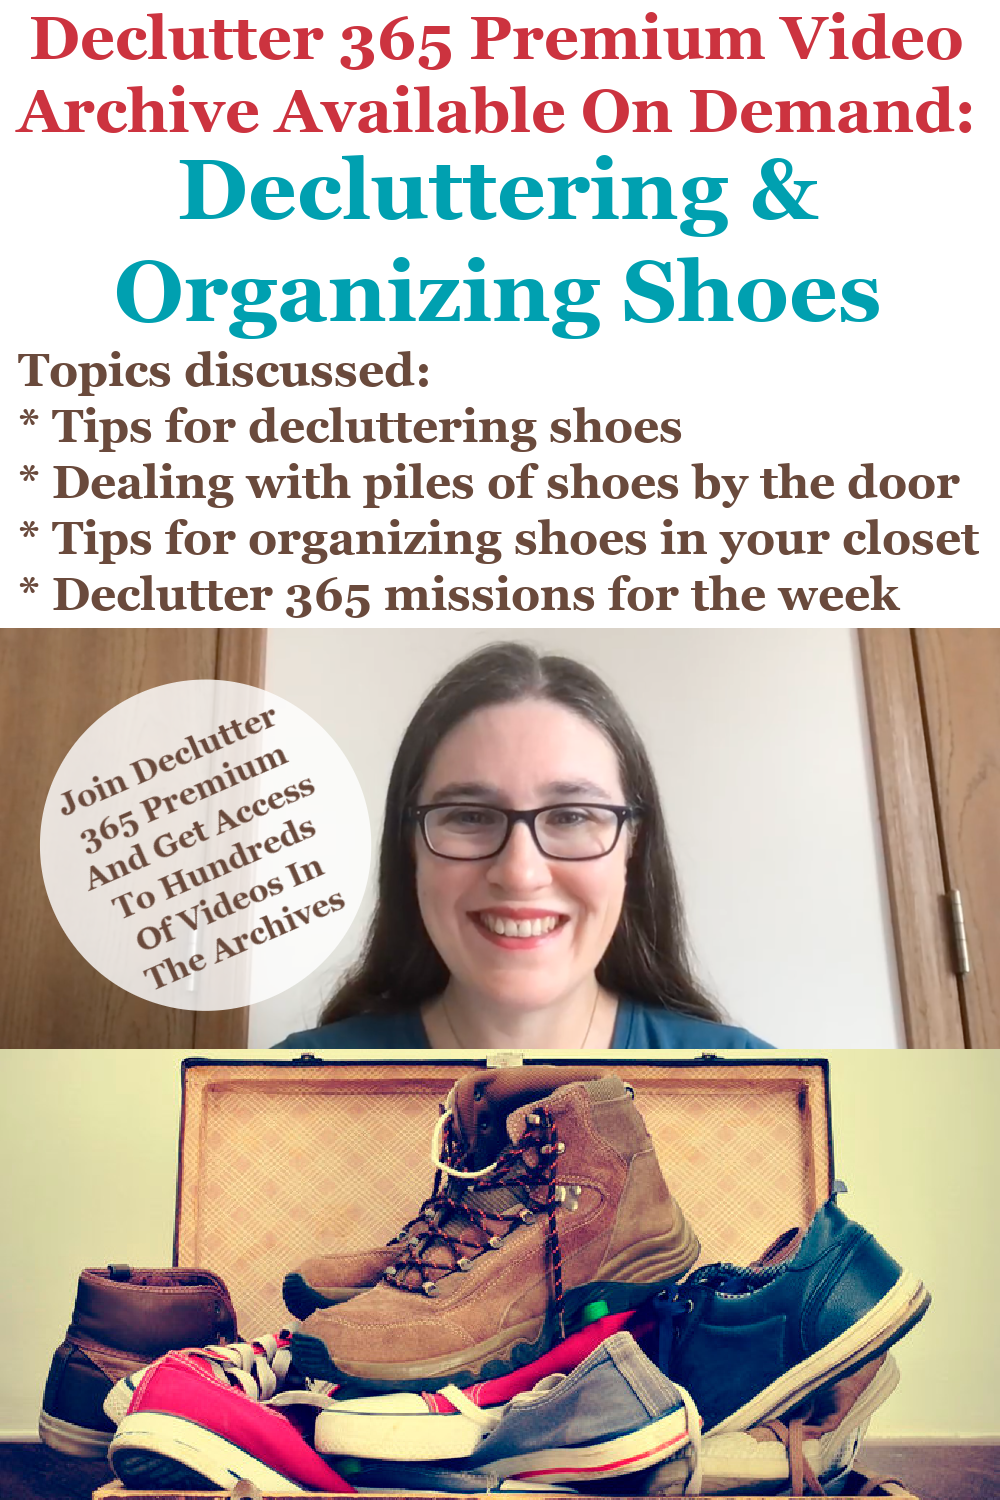 Declutter 365 Premium video archive available on demand all about decluttering and organizing shoes, on Home Storage Solutions 101